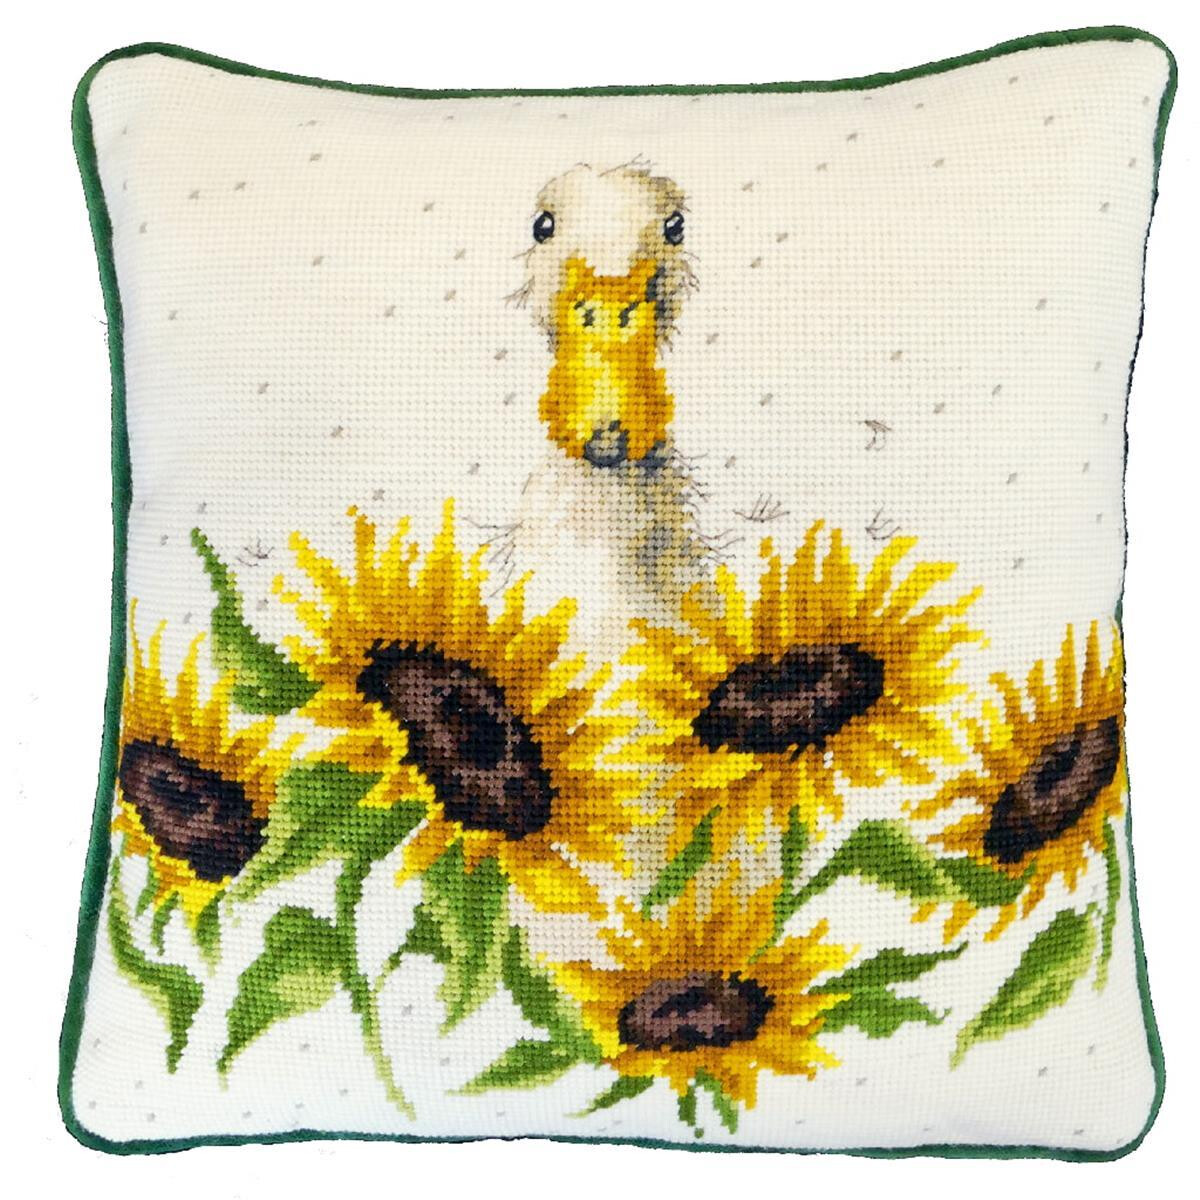 A white cushion with green piping shows a cheerful yellow...